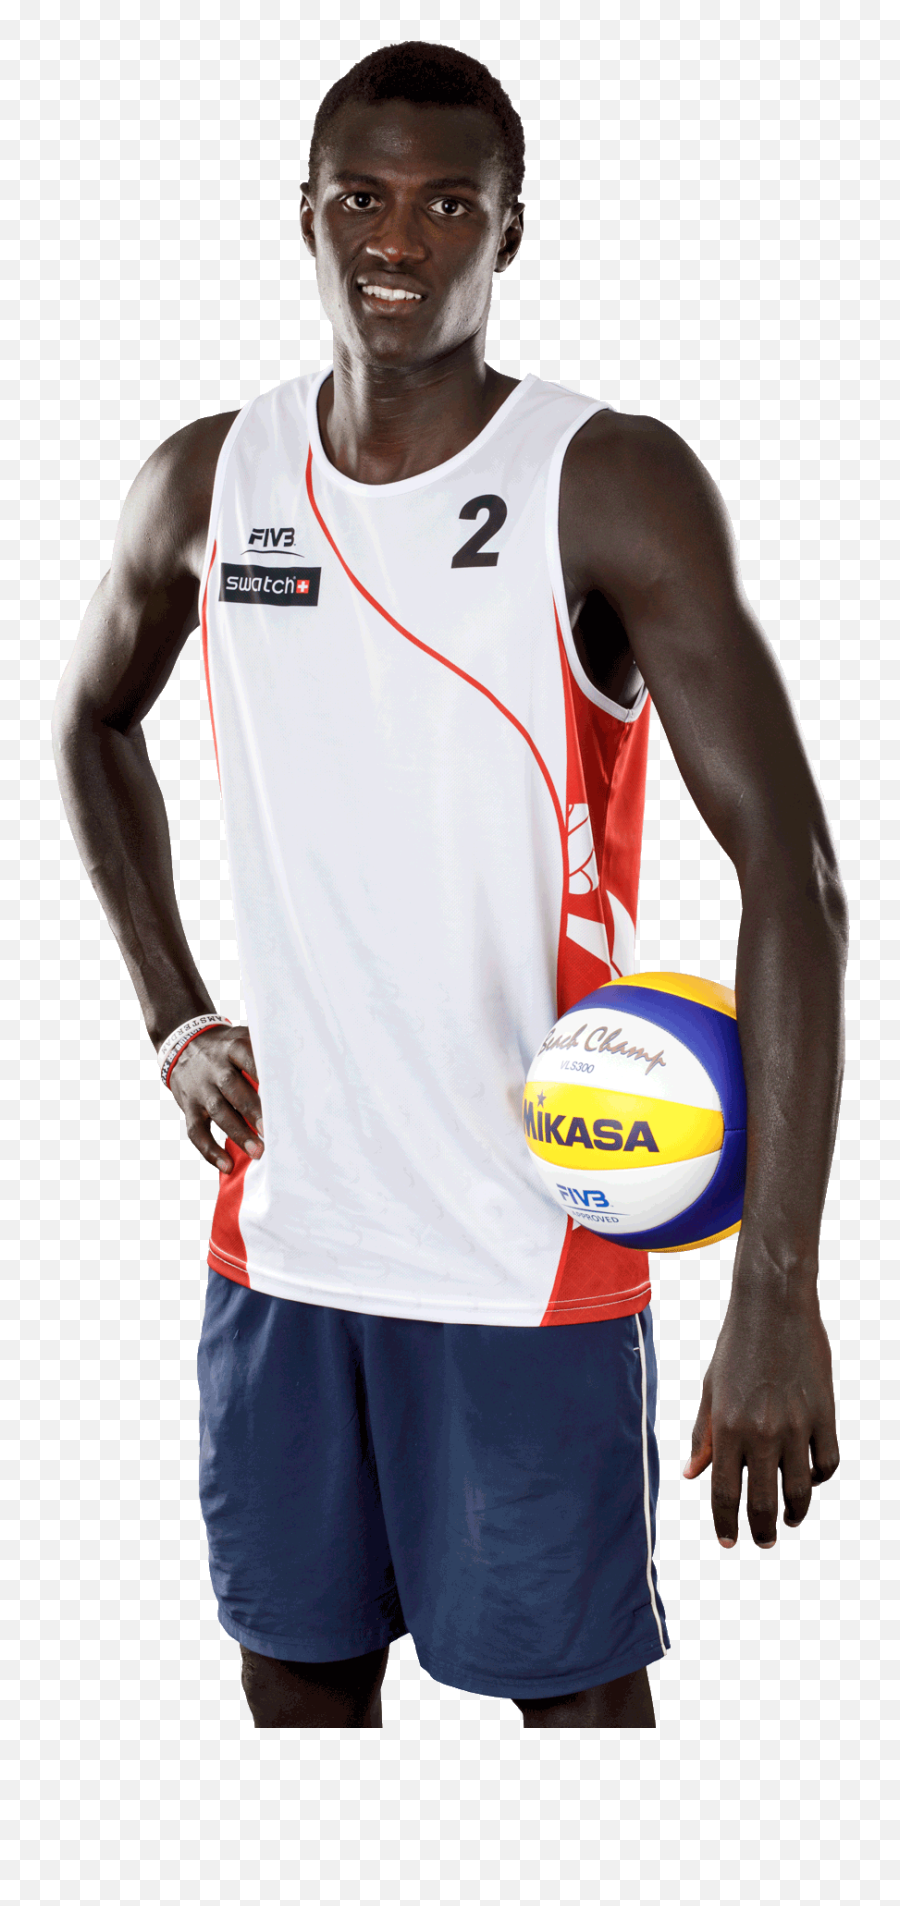 Cherif - Mikasa Png,Volleyball Player Png